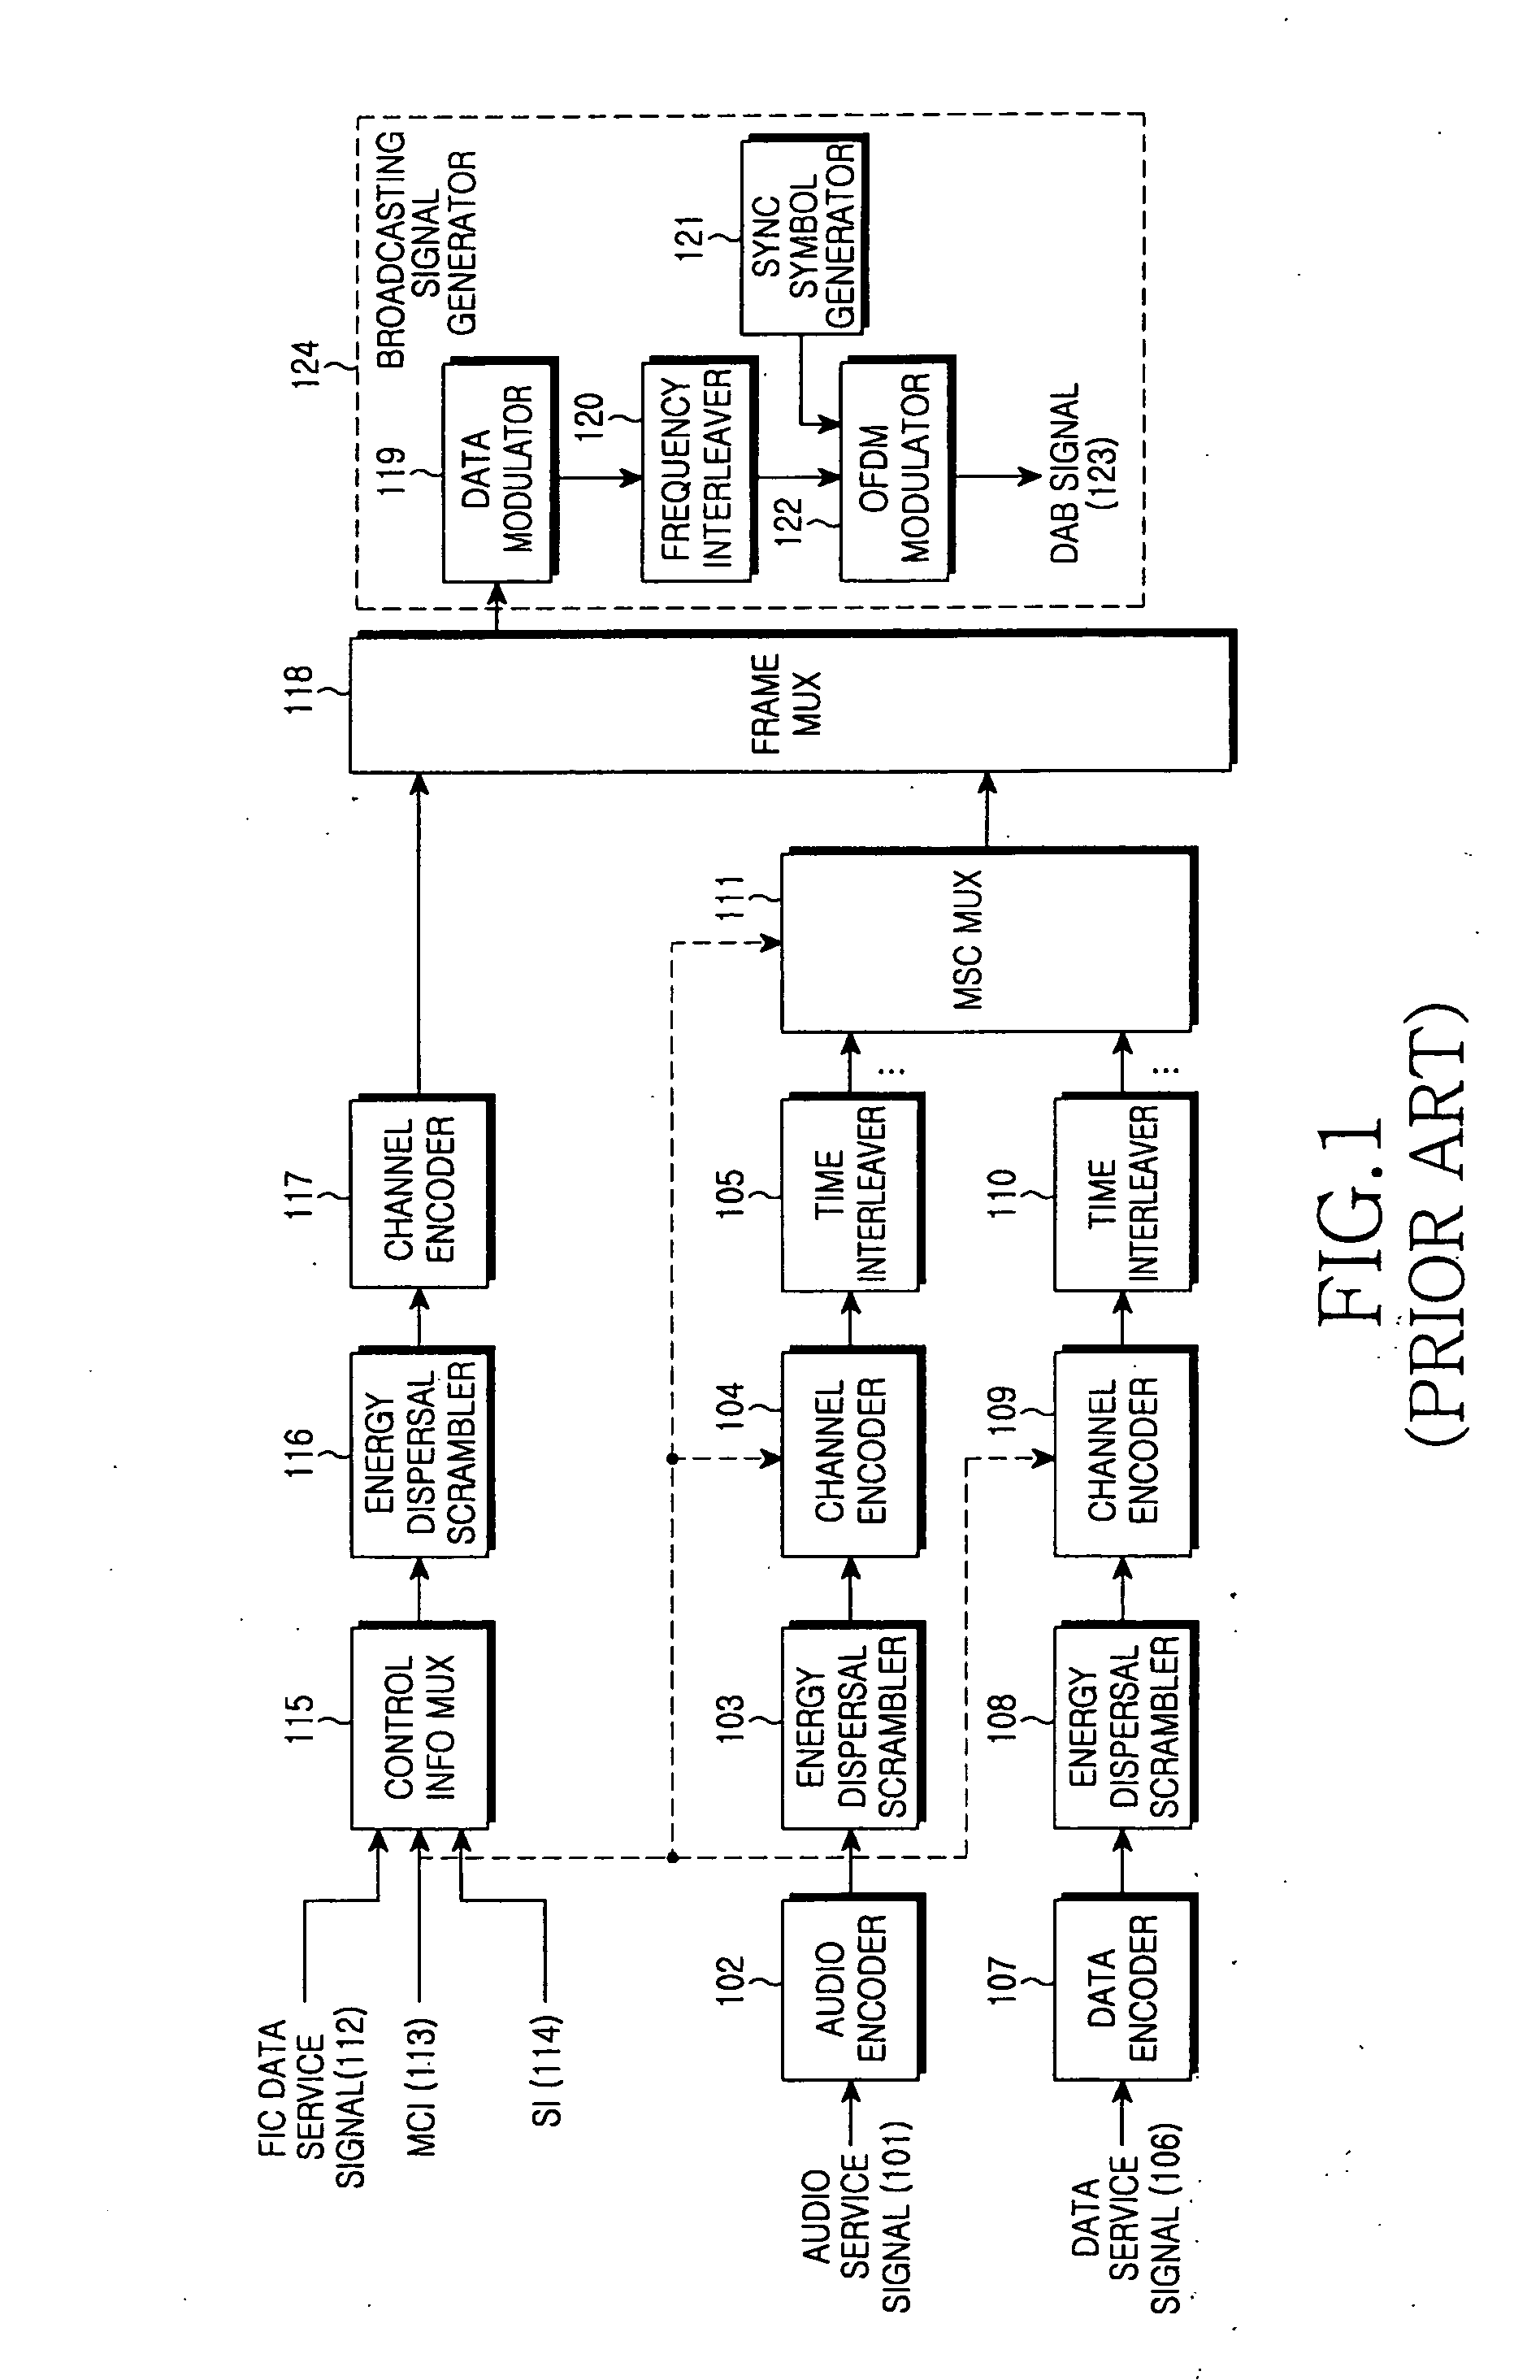 Method and apparatus for supporting a priority data transmission in a transmitter of a digital audio broadcasting system